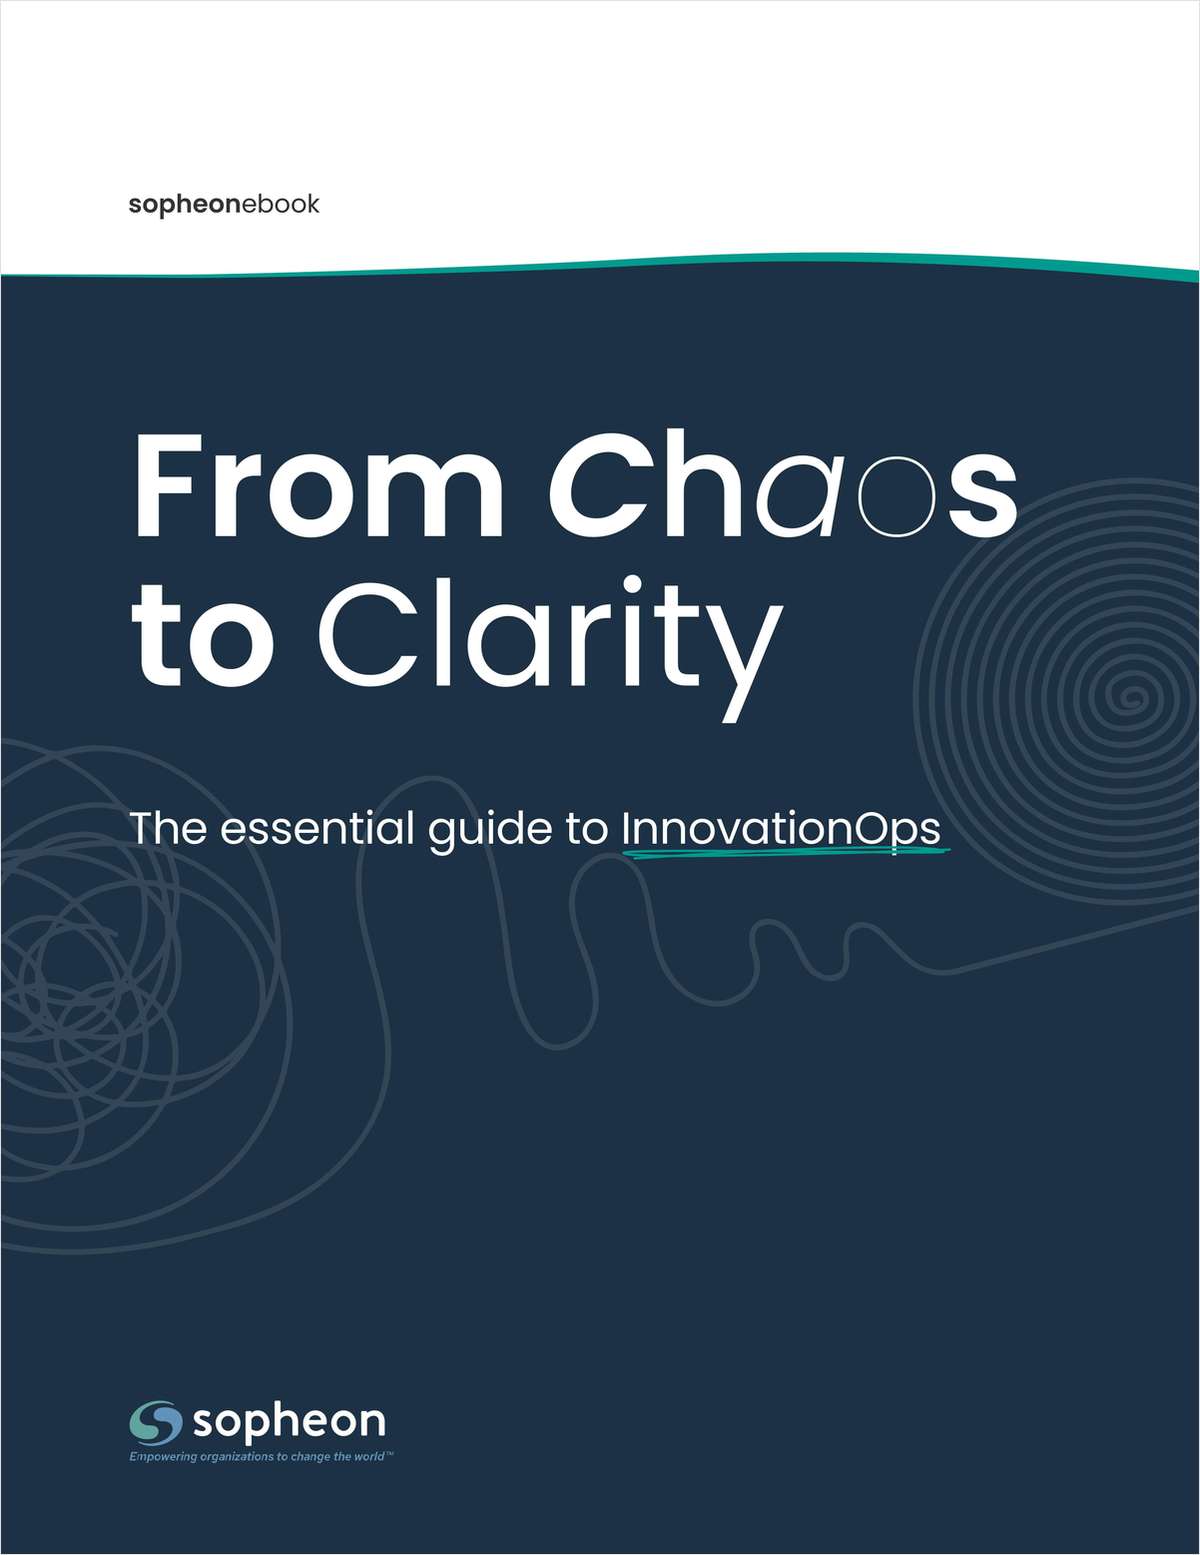 From chaos to control: The essential guide to InnovationOps